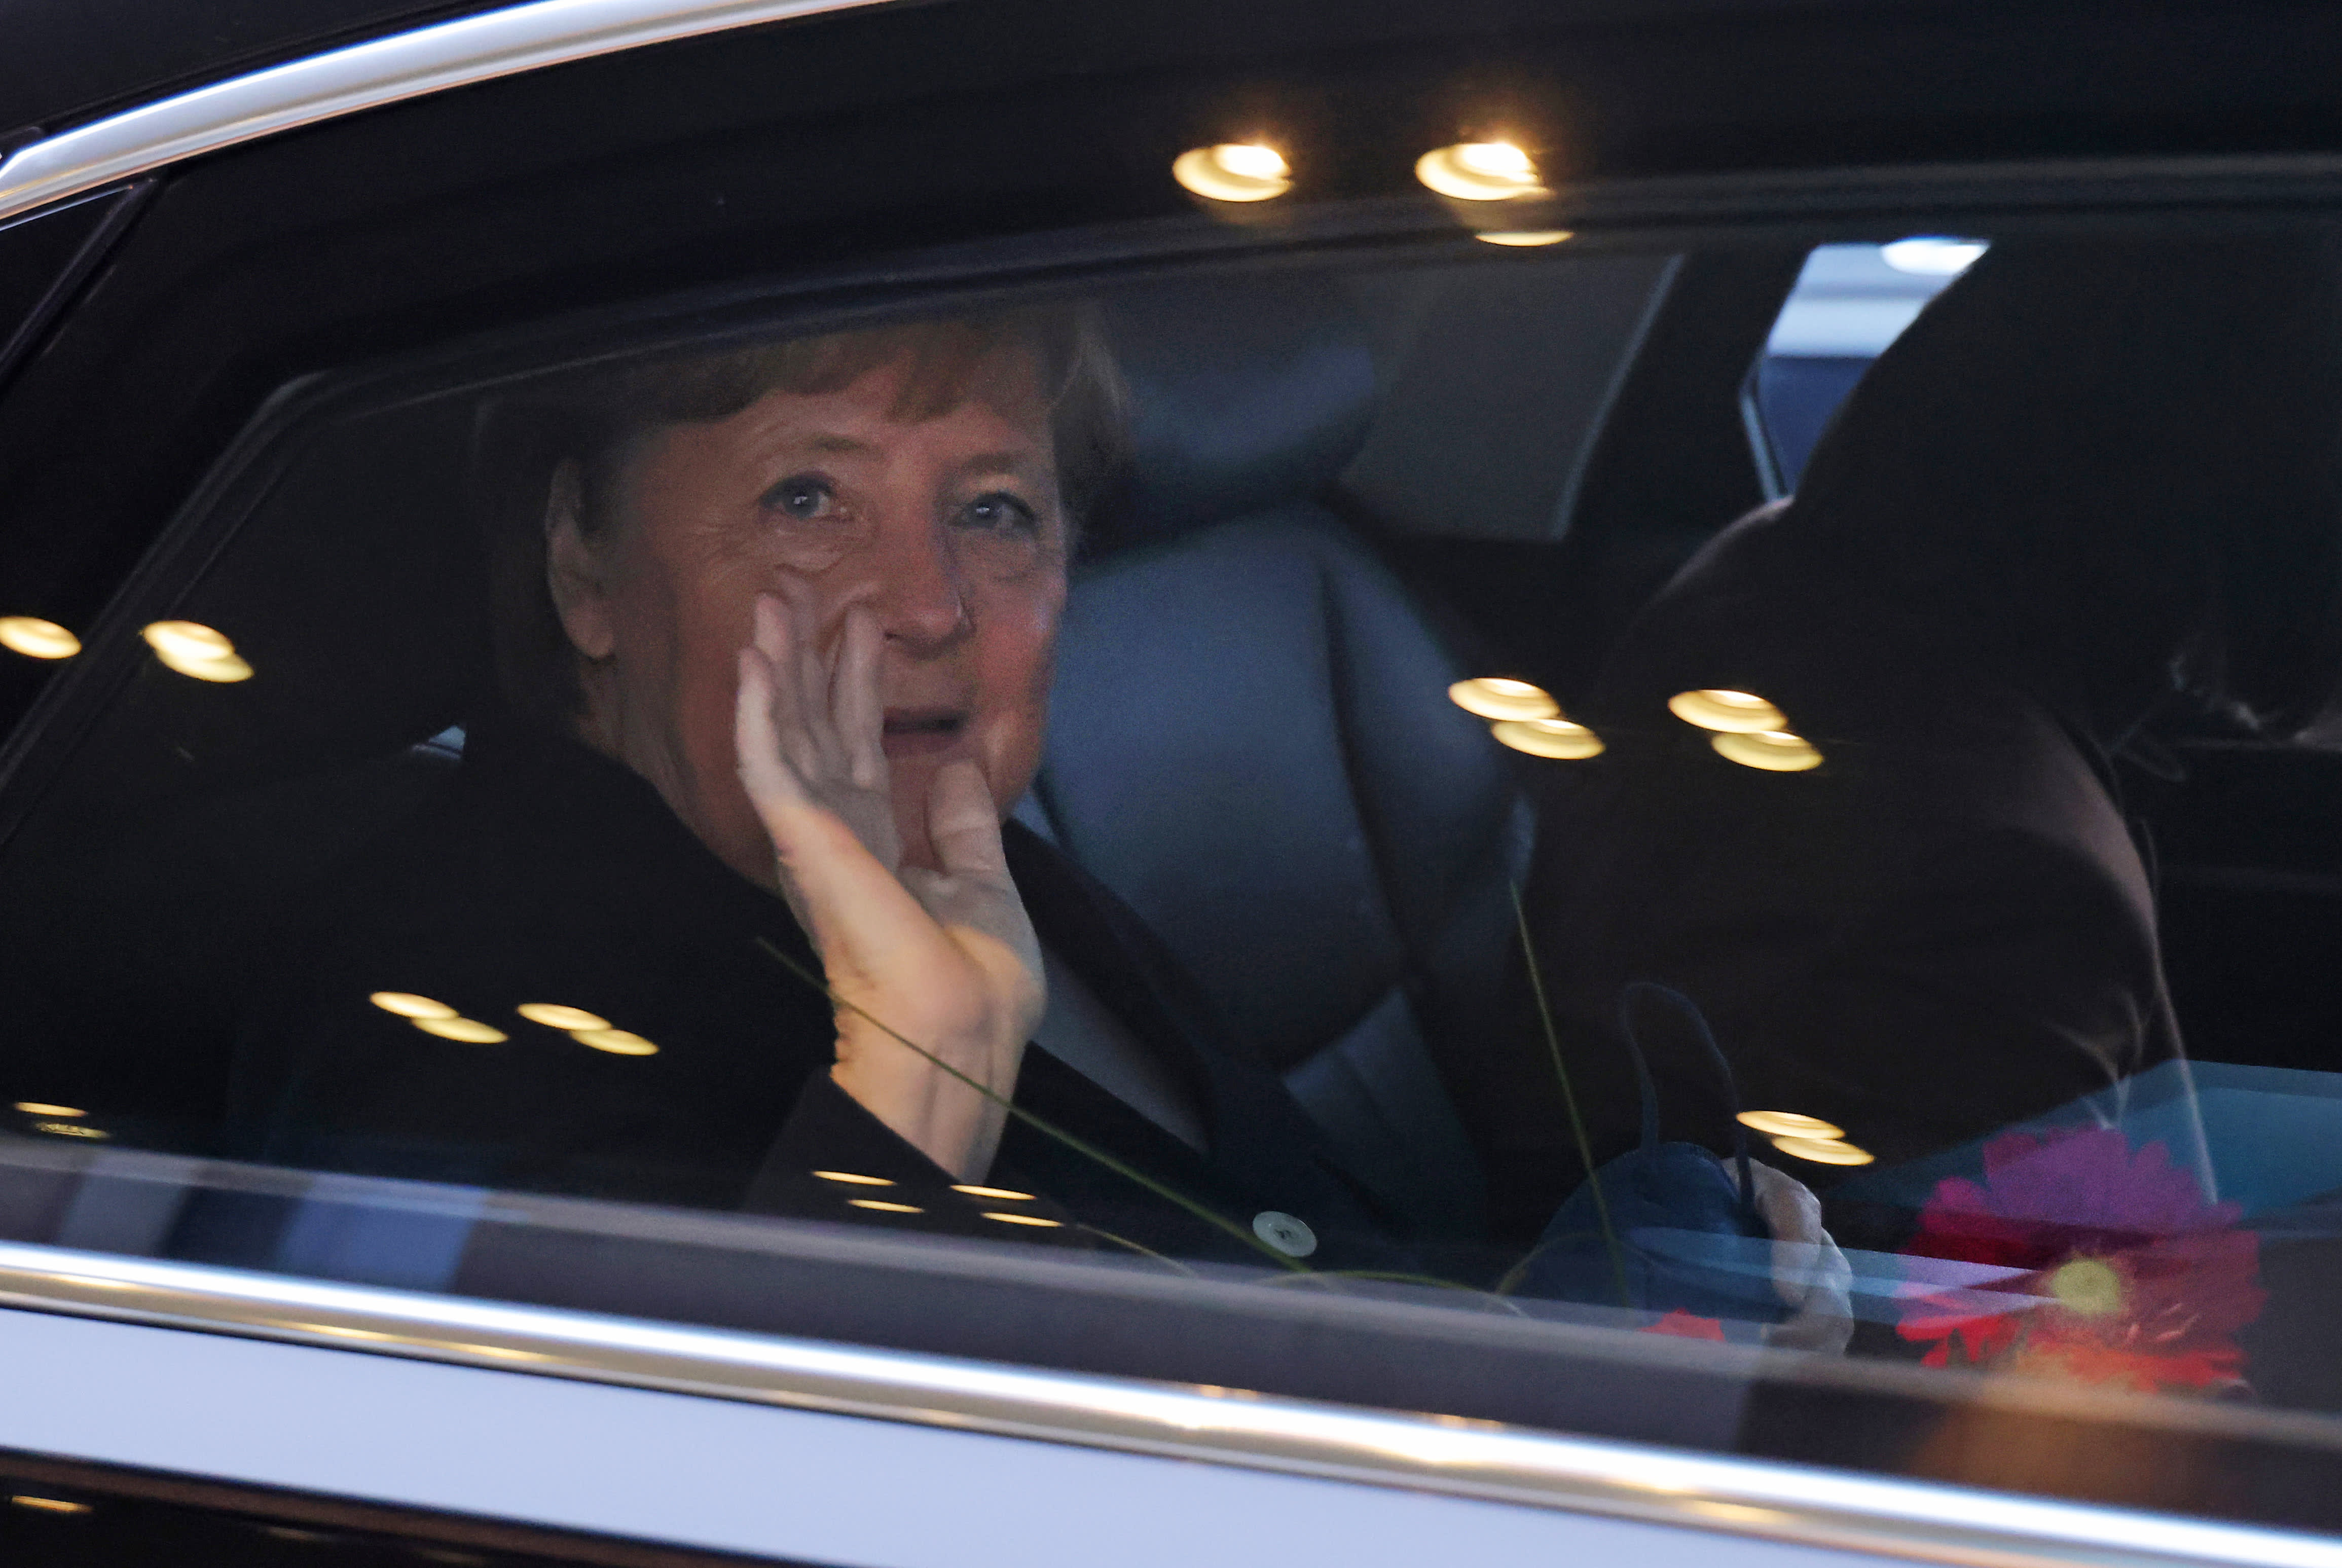 With Putin’s war in Europe, the legacy of Germany’s Merkel is now being seen in a very different light